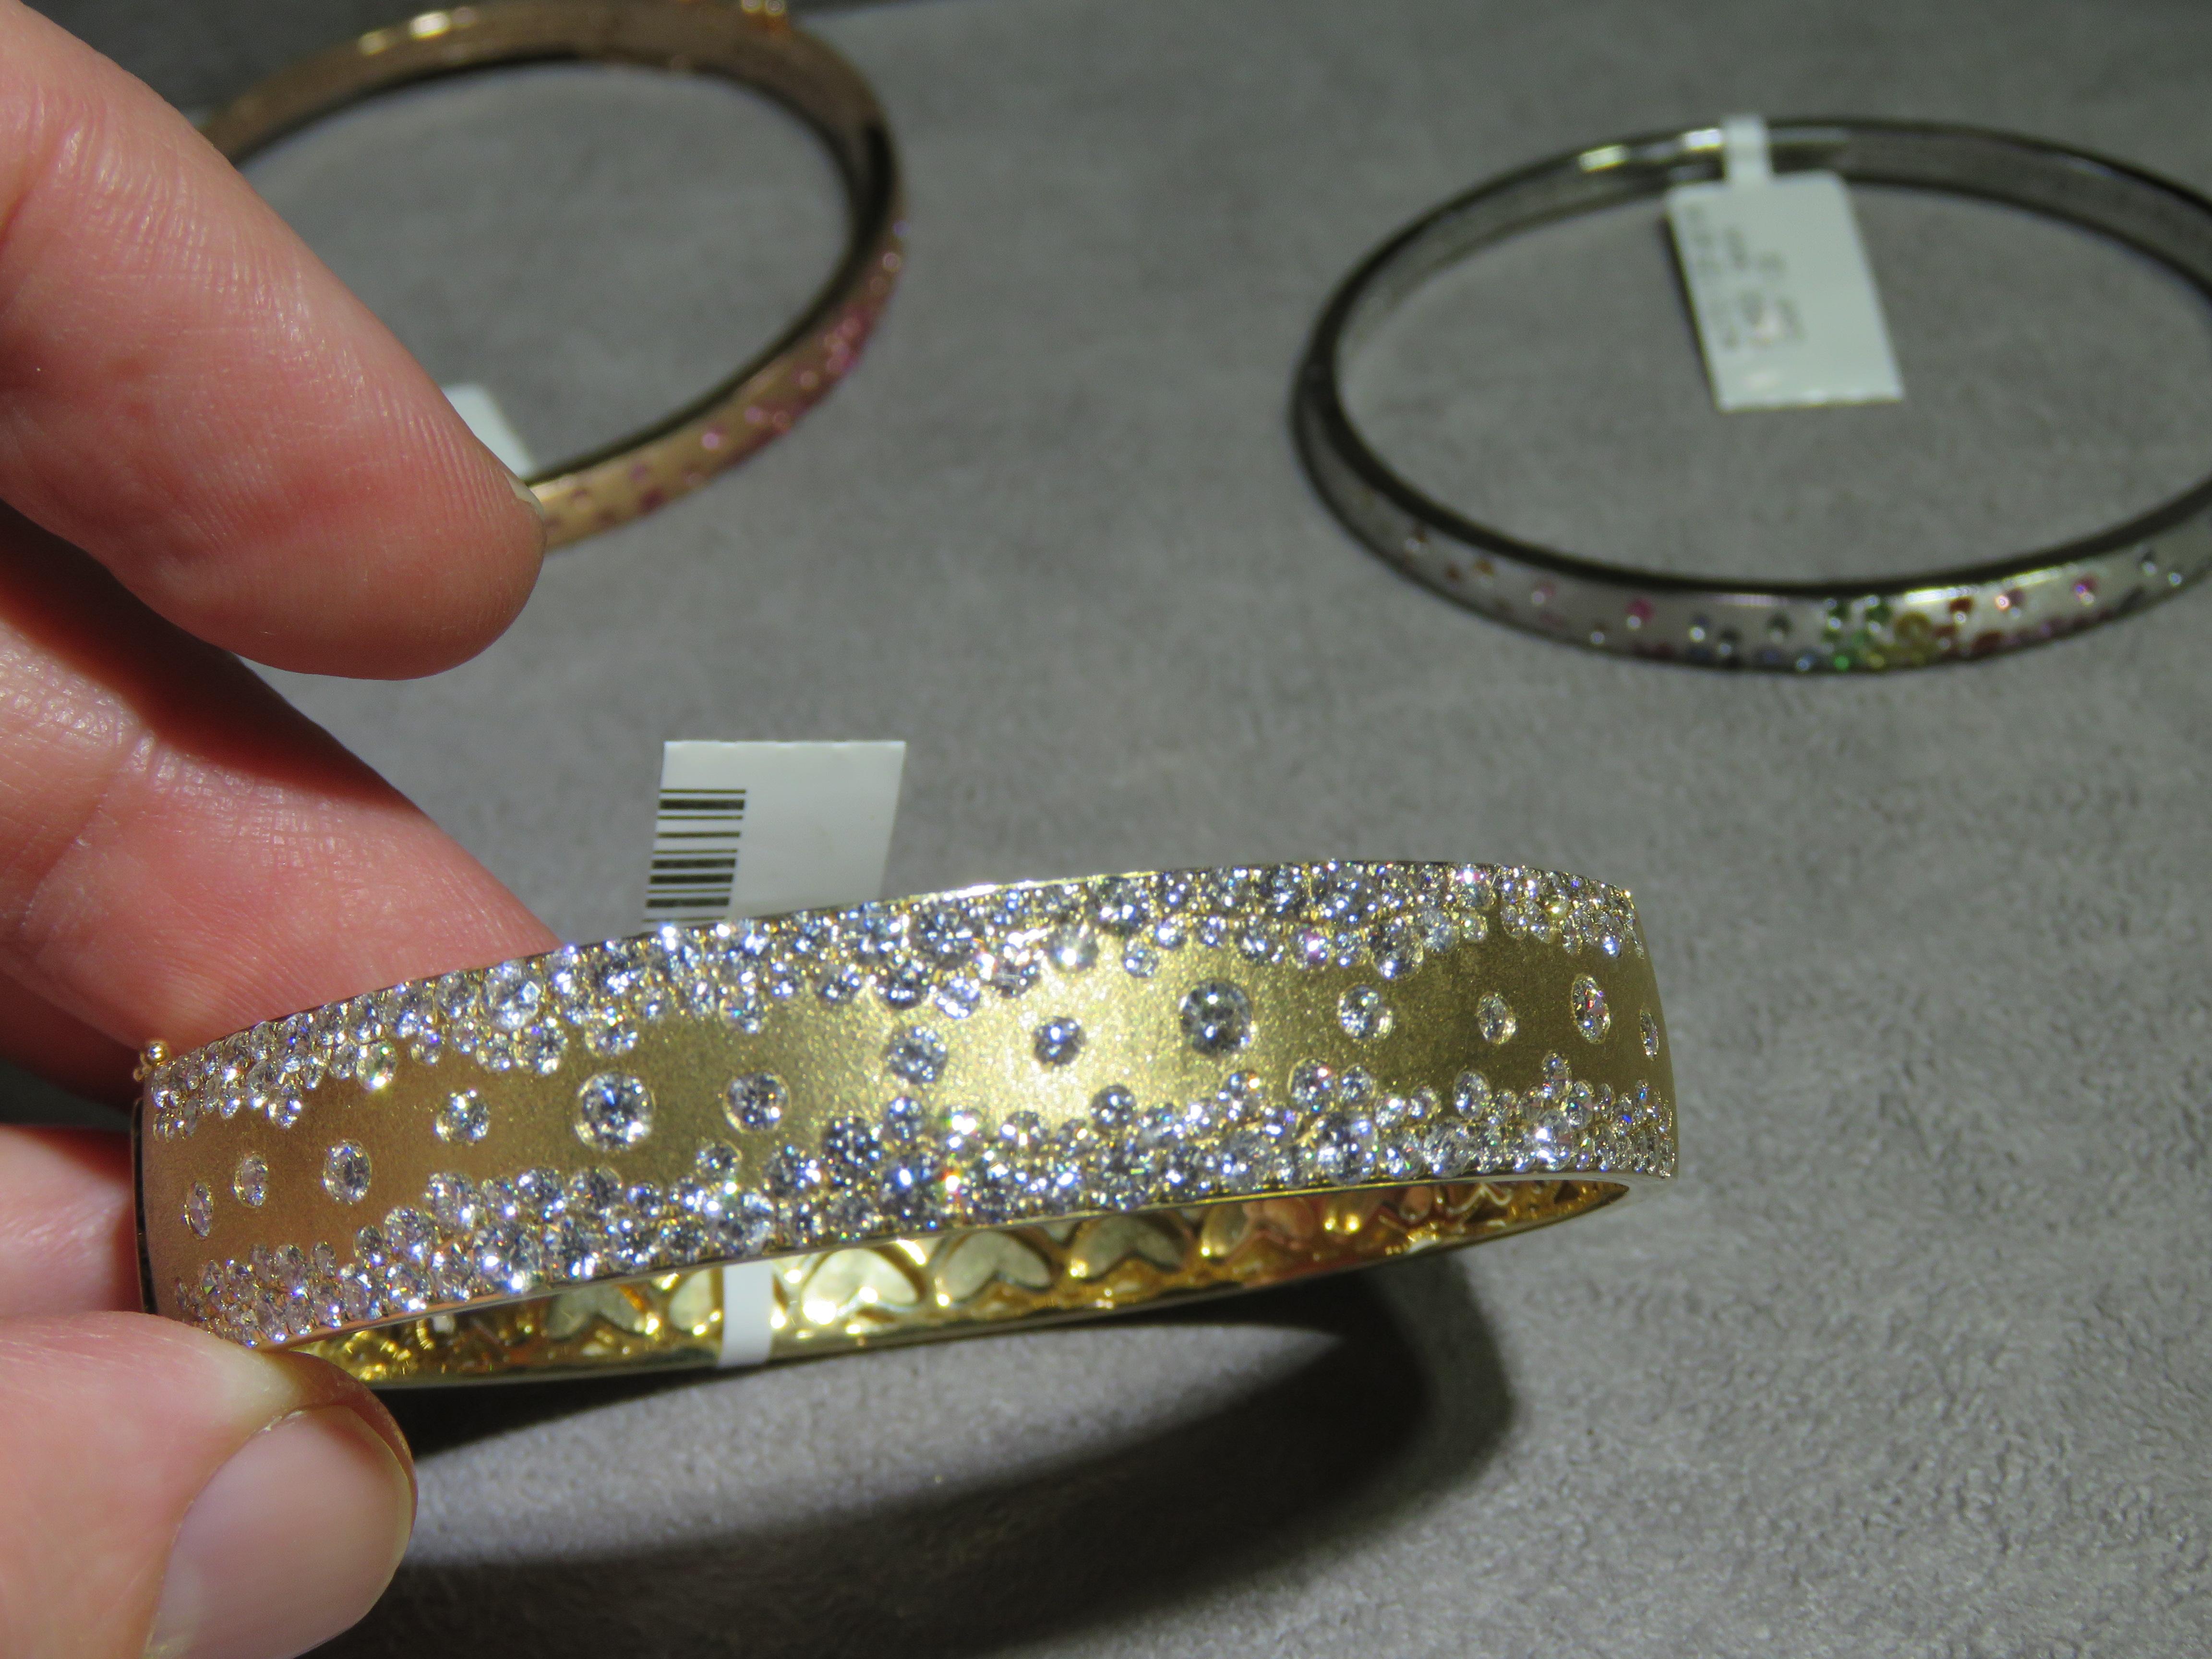 The Following Item we are offering is a Rare Magnificent Radiant 18KT Yellow Gold Large Rare Gorgeous Fancy Diamond Bangle Bracelet. Bracelet is comprised of Beautifu Gorgeous Glittering Diamonds!!! T.C.W. Approx 5CTS!!! This Gorgeous Bangle is a